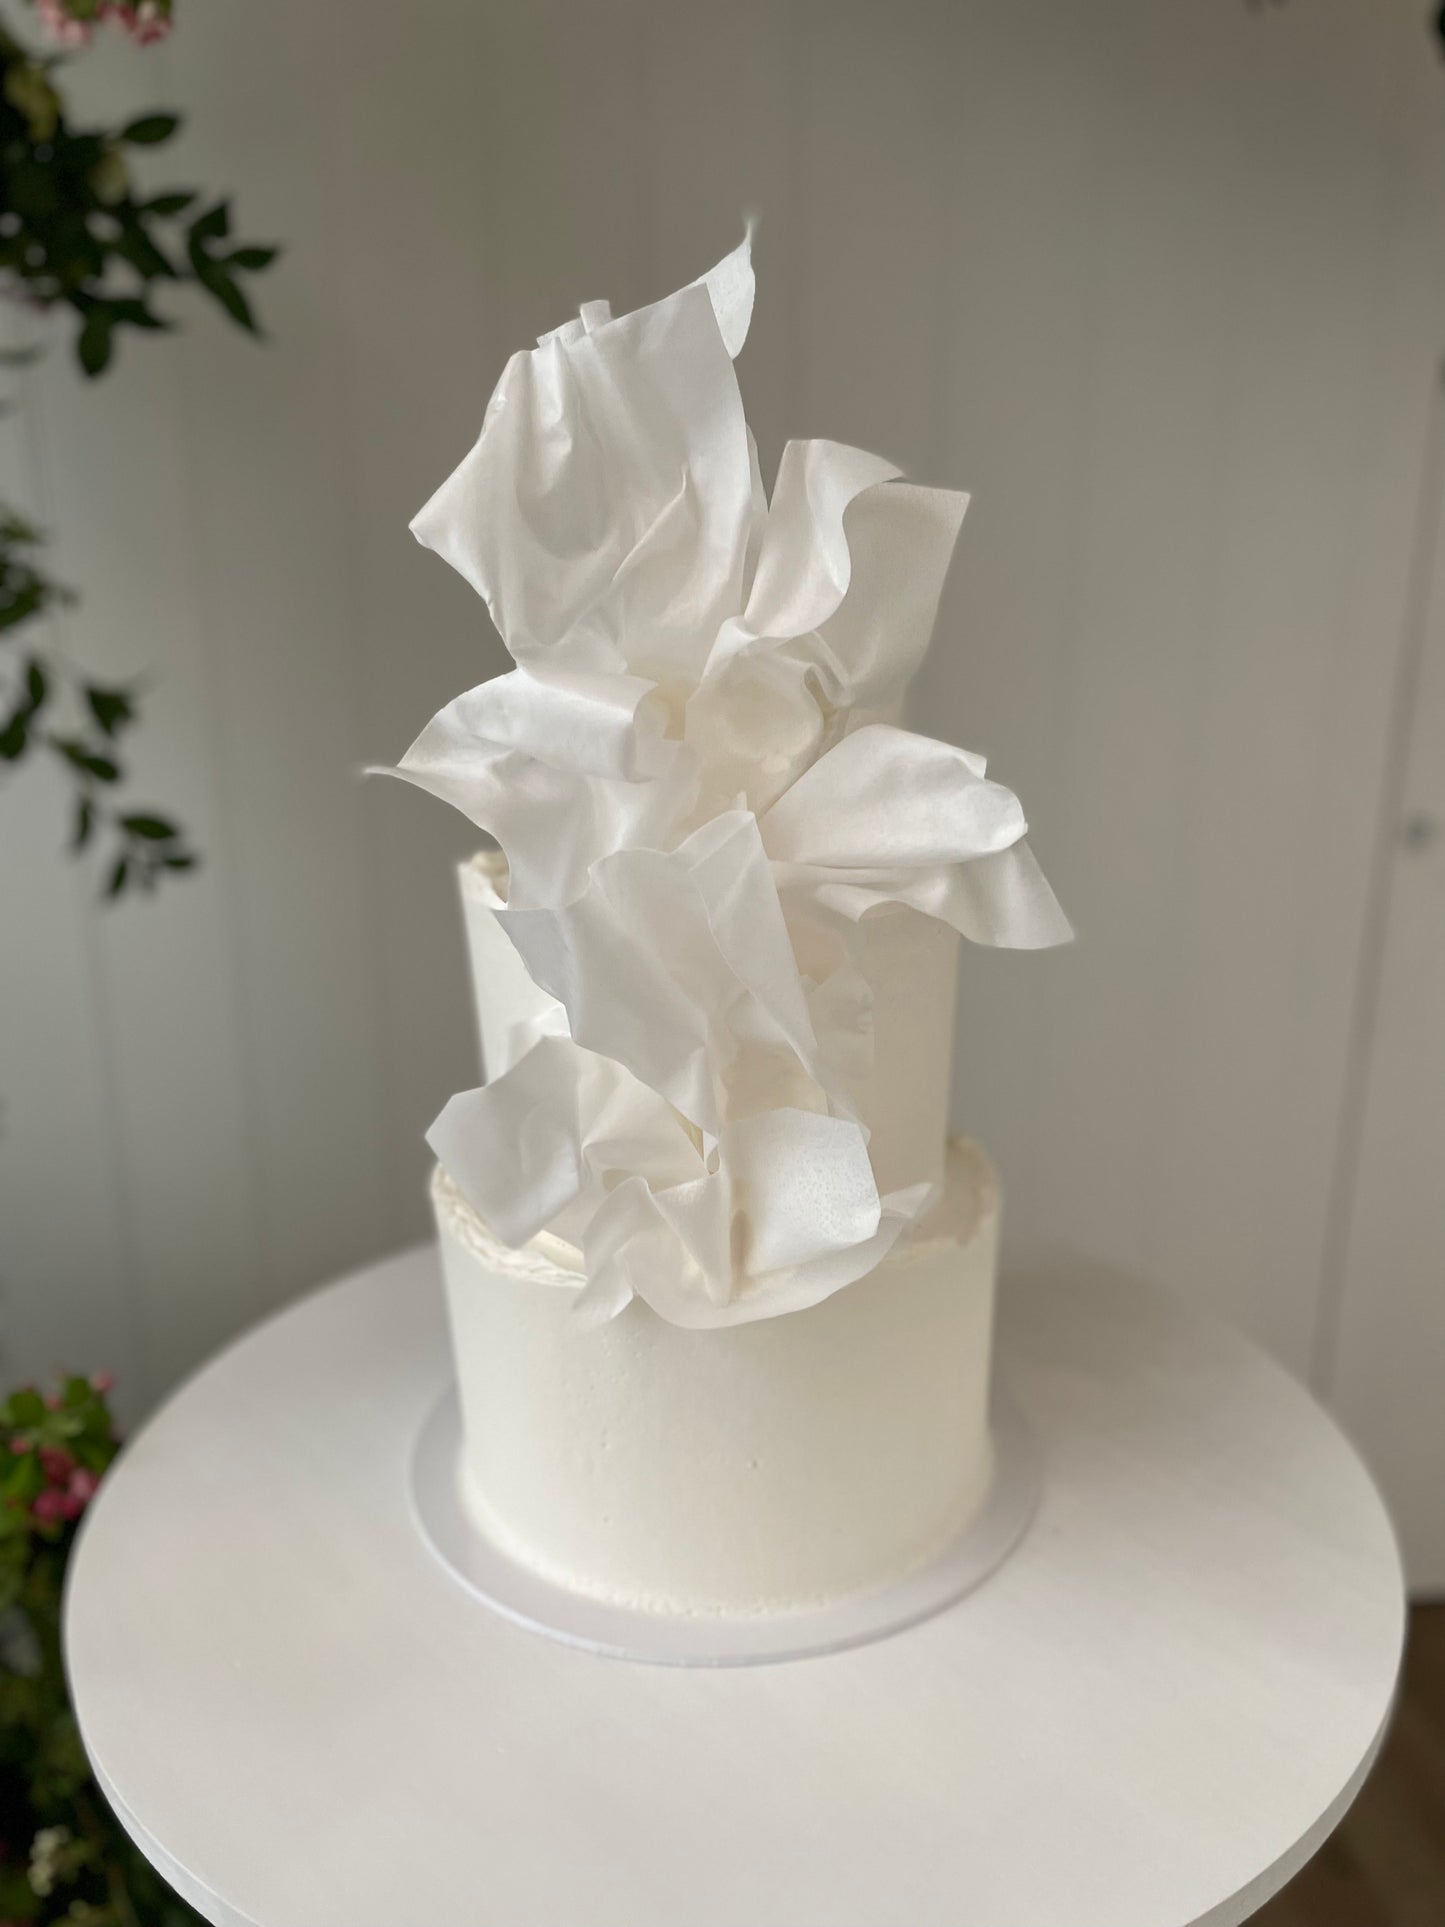 3 Tier Buttercream with Wafer Paper Sails